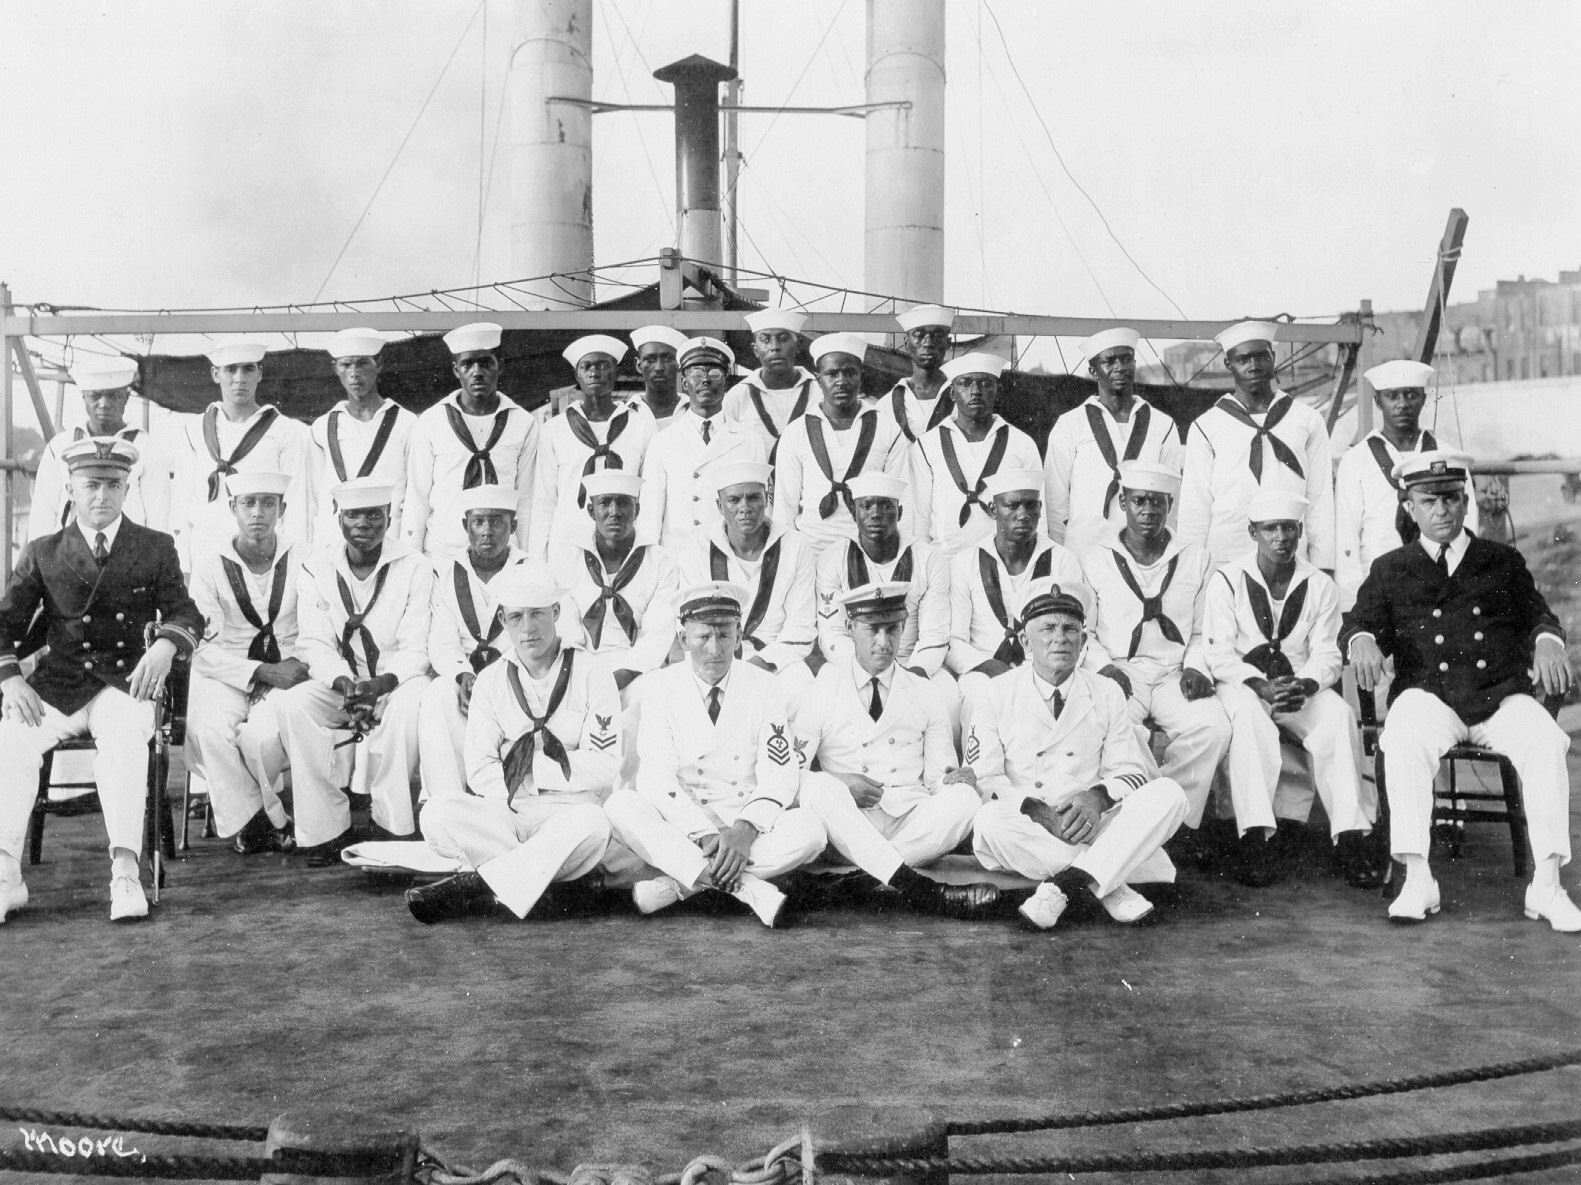 A rare image of River Cutter Yocona’s crew in 1925 shows her black enlisted men, and white officers and non-commissioned officers posed aboard the cutter. (Courtesy of U.S. Coast Guard)